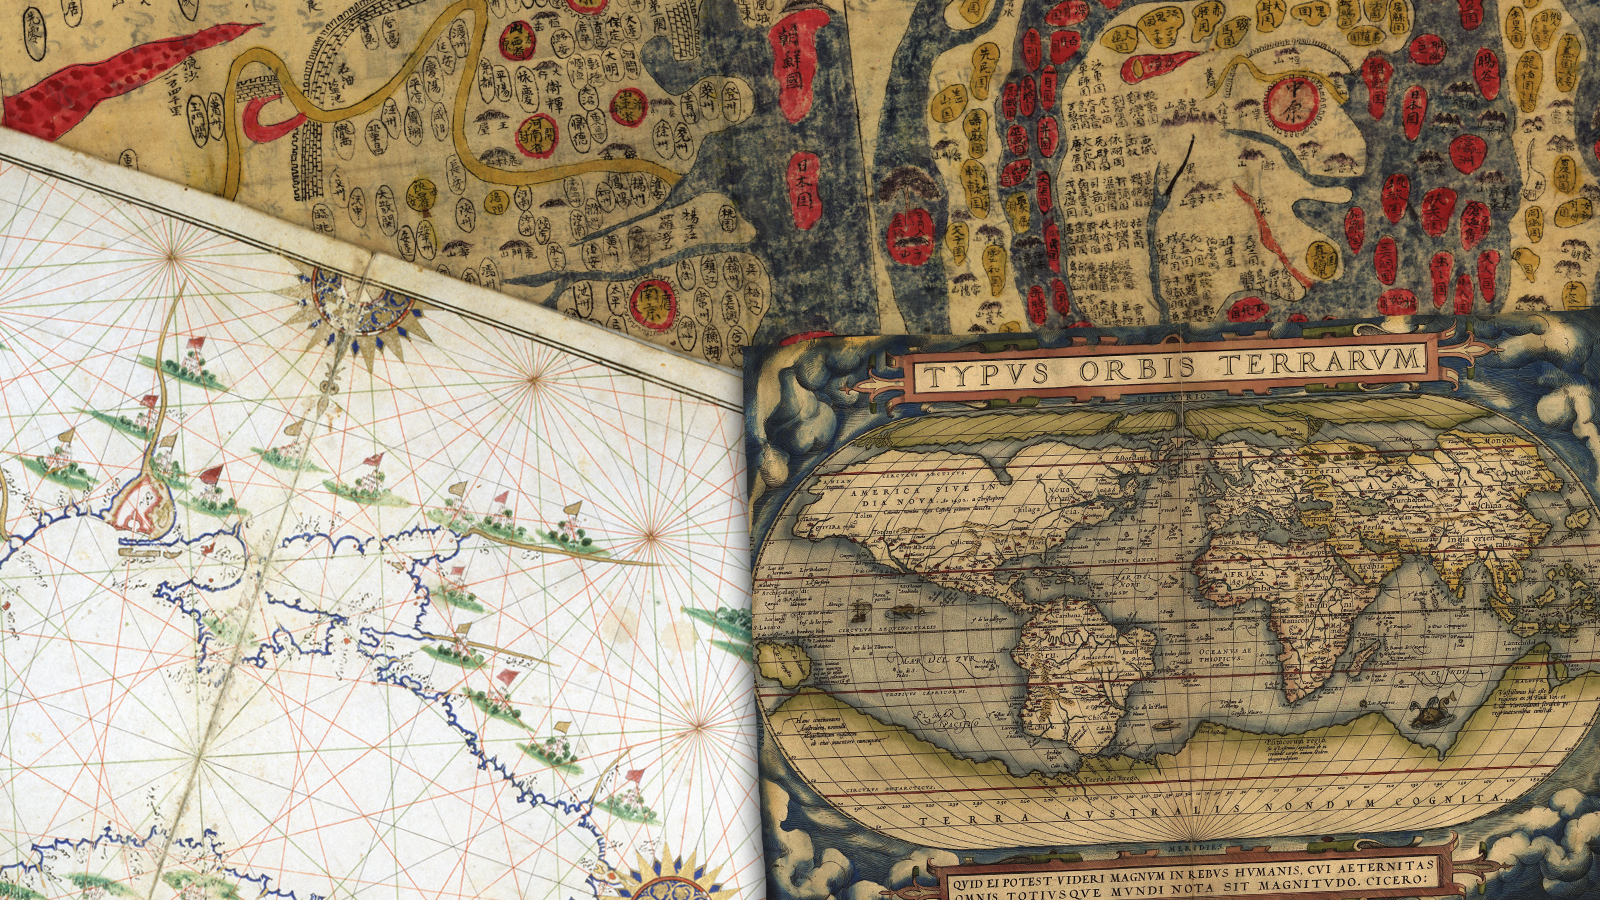 Ancient Chinese, Turkish, and Flemish maps; links to news story